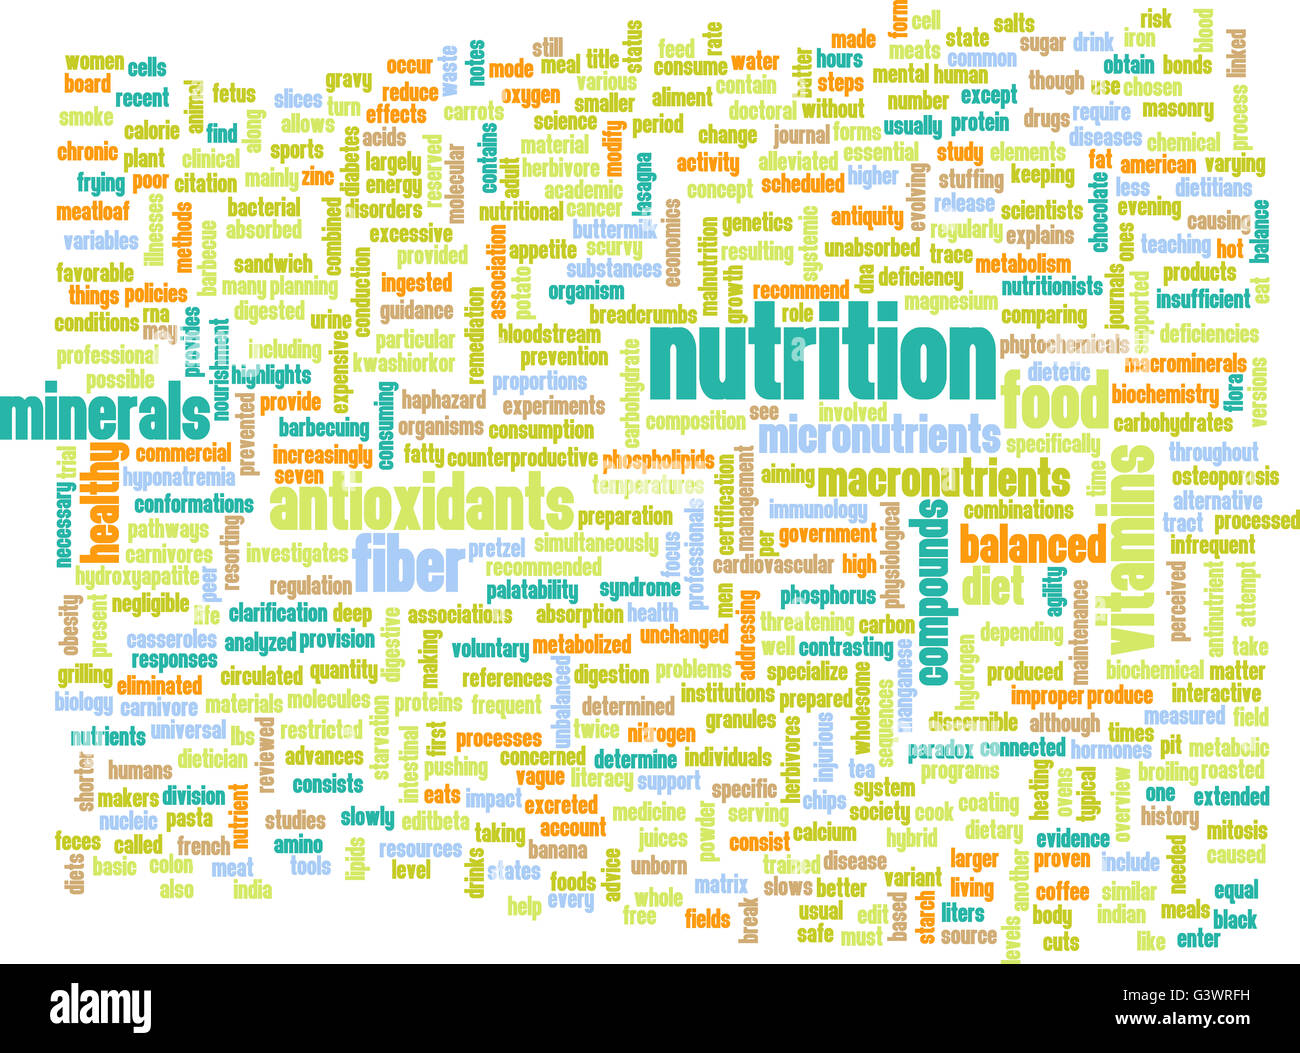 Nutrition Abstract as a Word Cloud Art Stock Photo